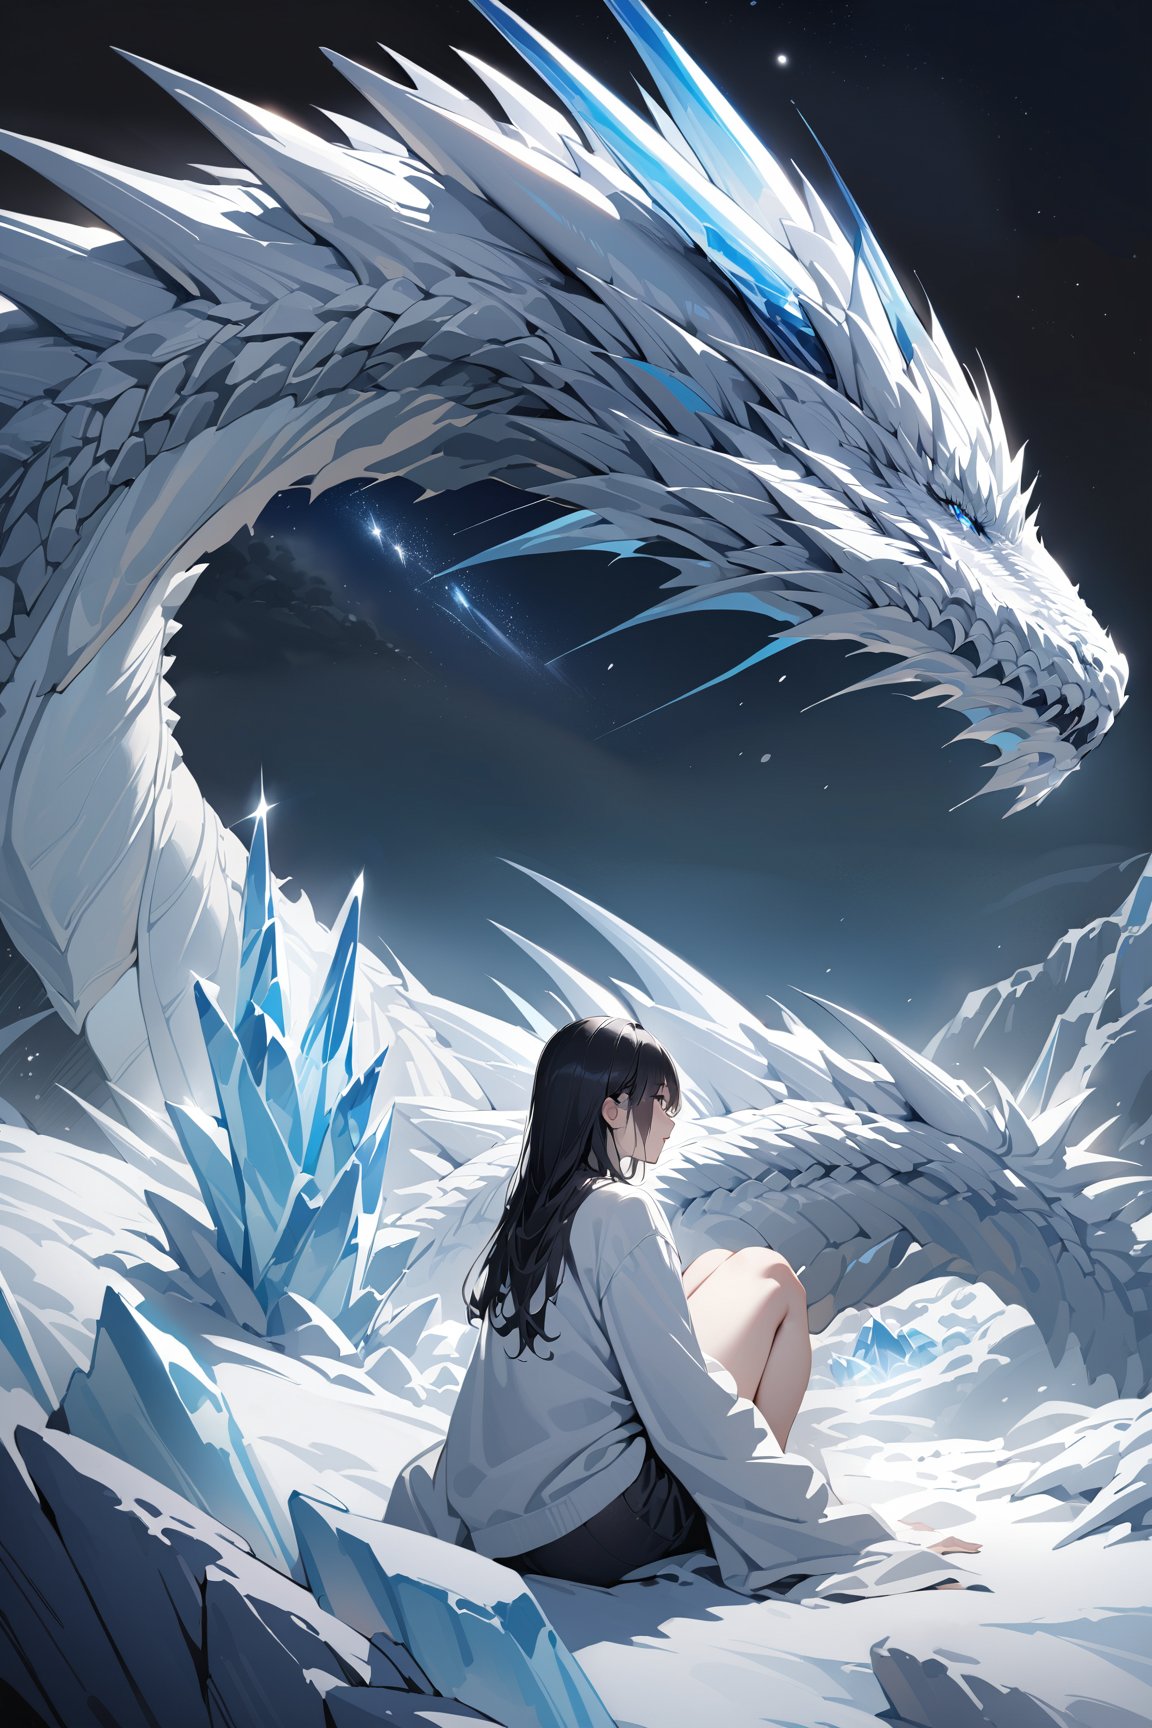 white dragon and girl,
starry sky,night,ice world,
masterpiece, best quality,photorealistic,white dragon